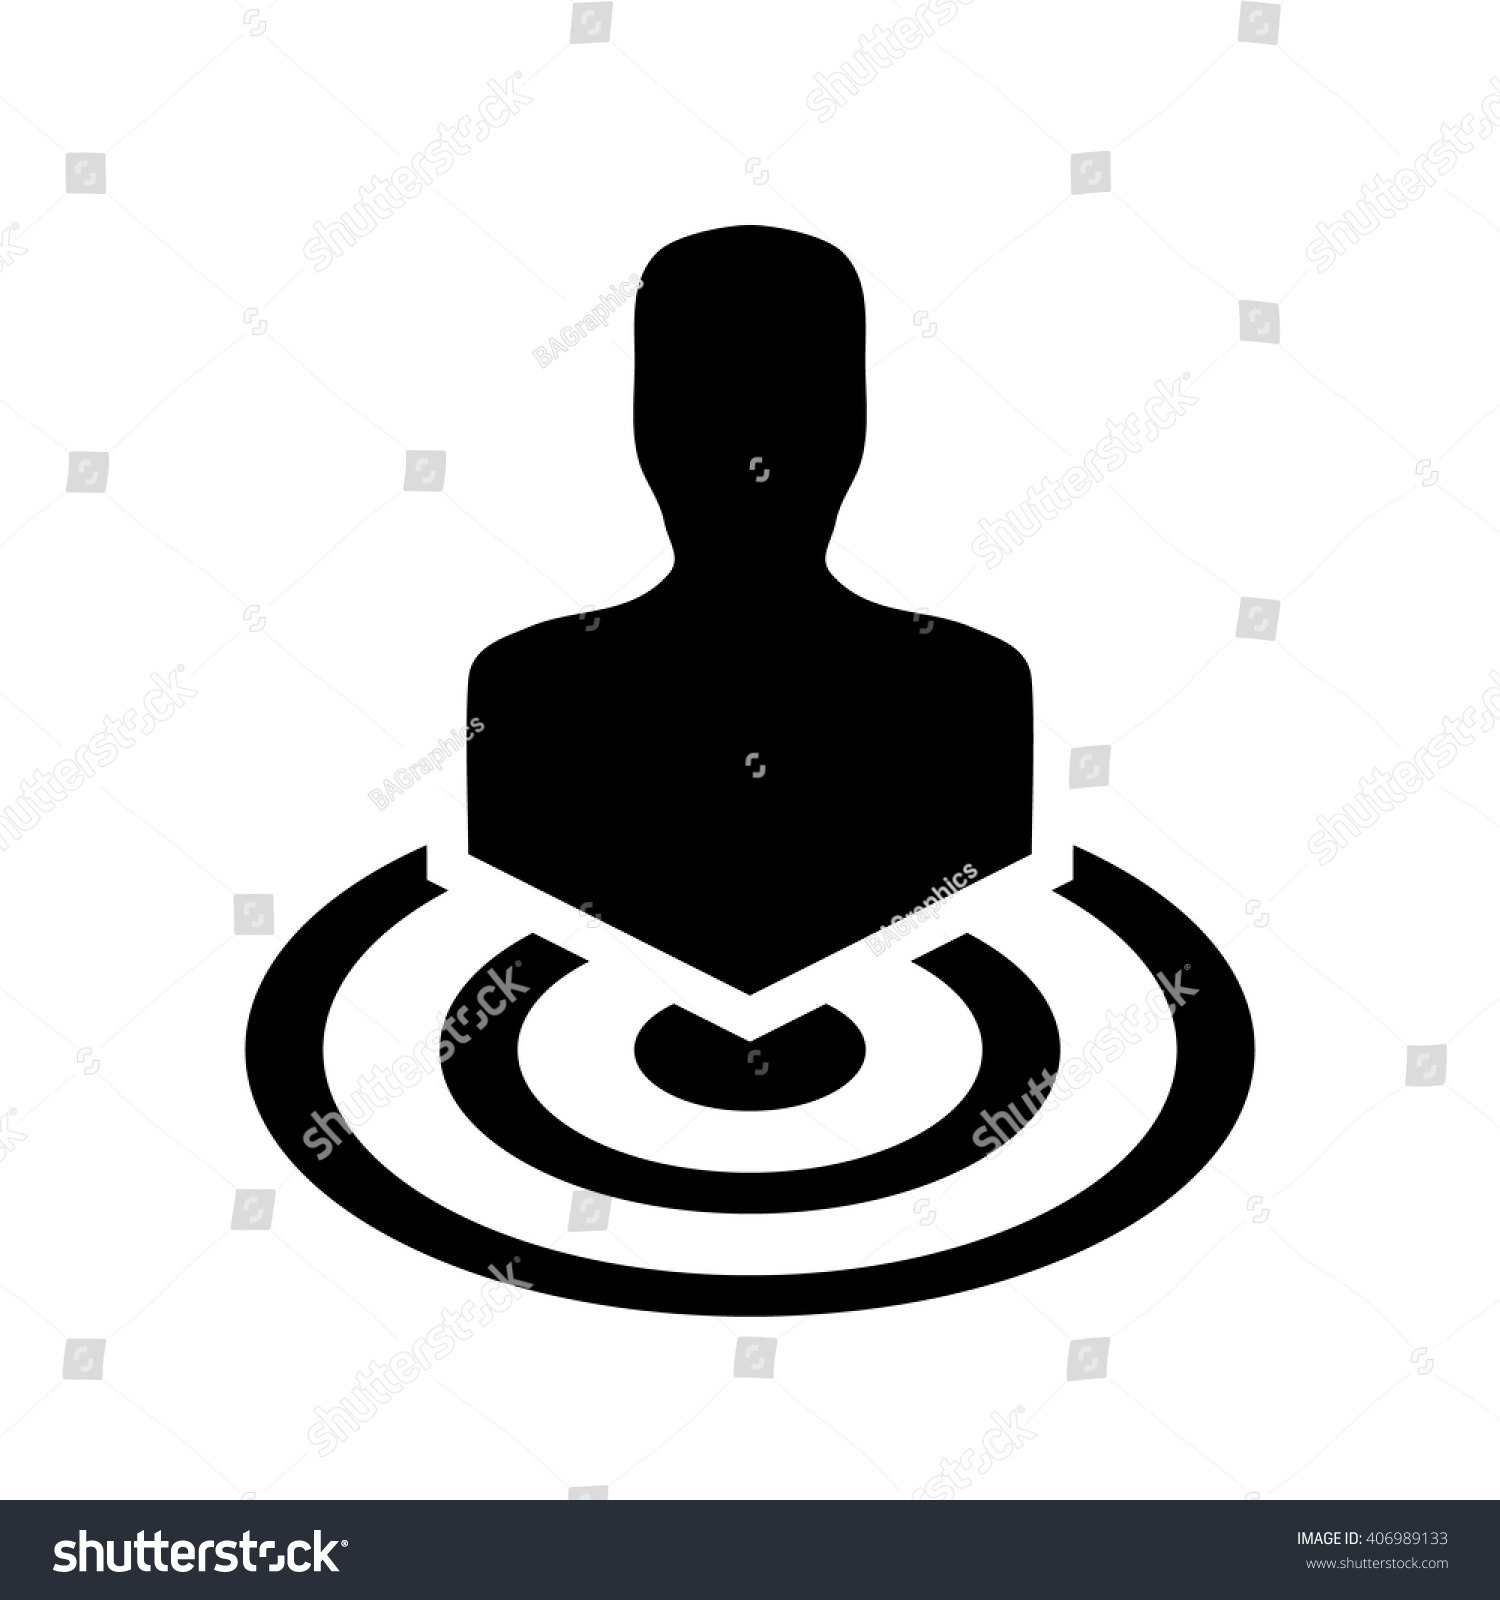 SVG of Target group vector. Contributor. Compatible with JPG, PNG, AI, CDR, SVG, PDF, EPS.  svg